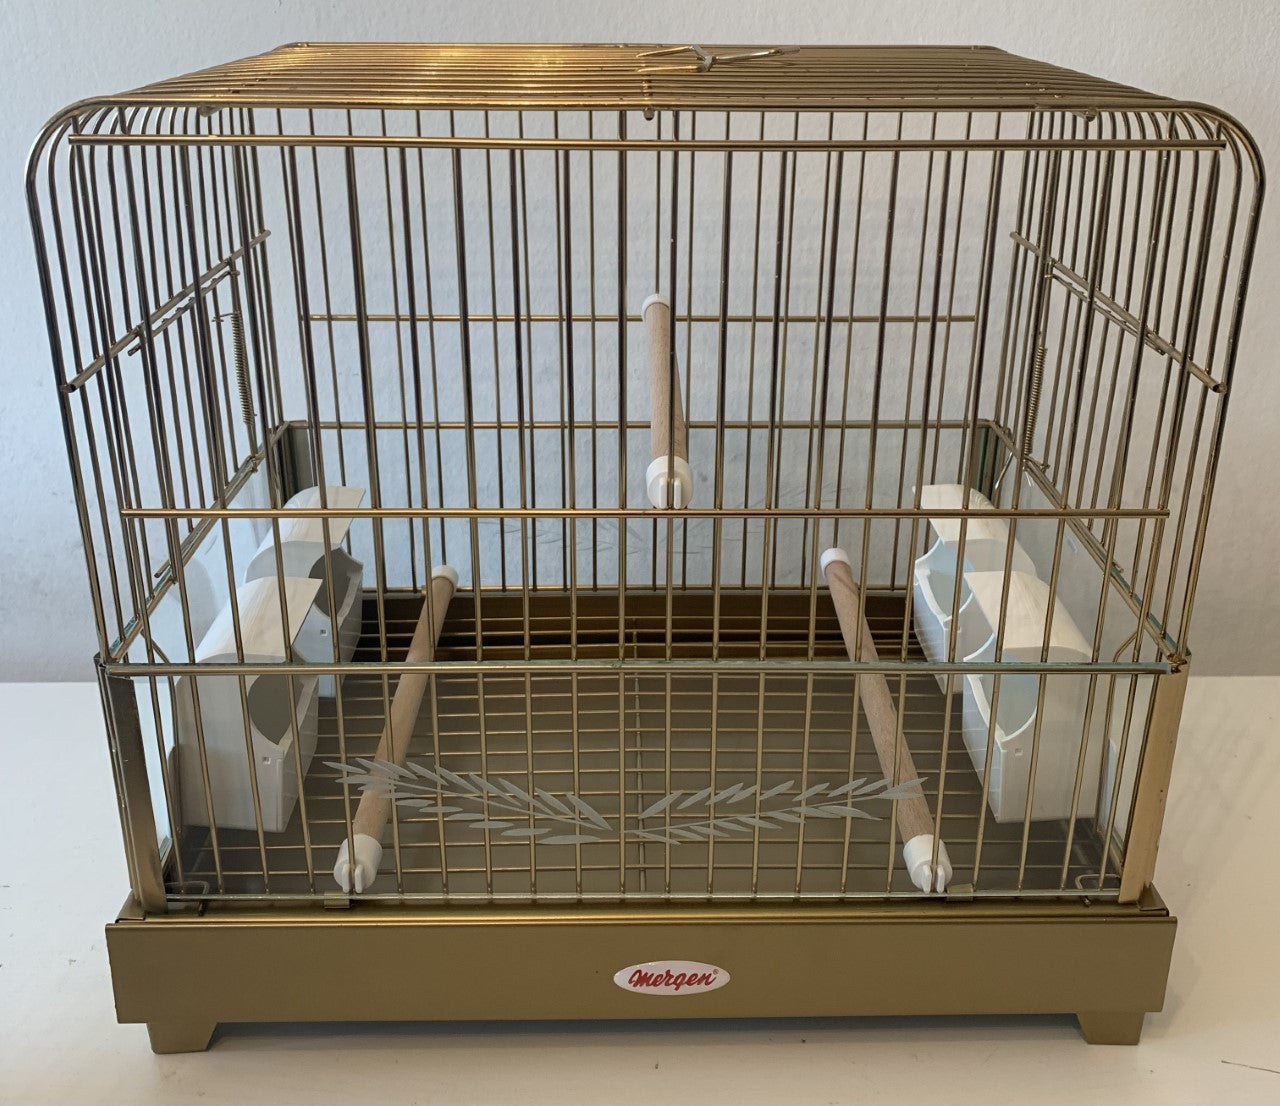 36cm Silver-Gold-Black Metal Bird Cage (Large) Size 36 cm's x 27 cm's x 33 cm's Top Quality Brand New